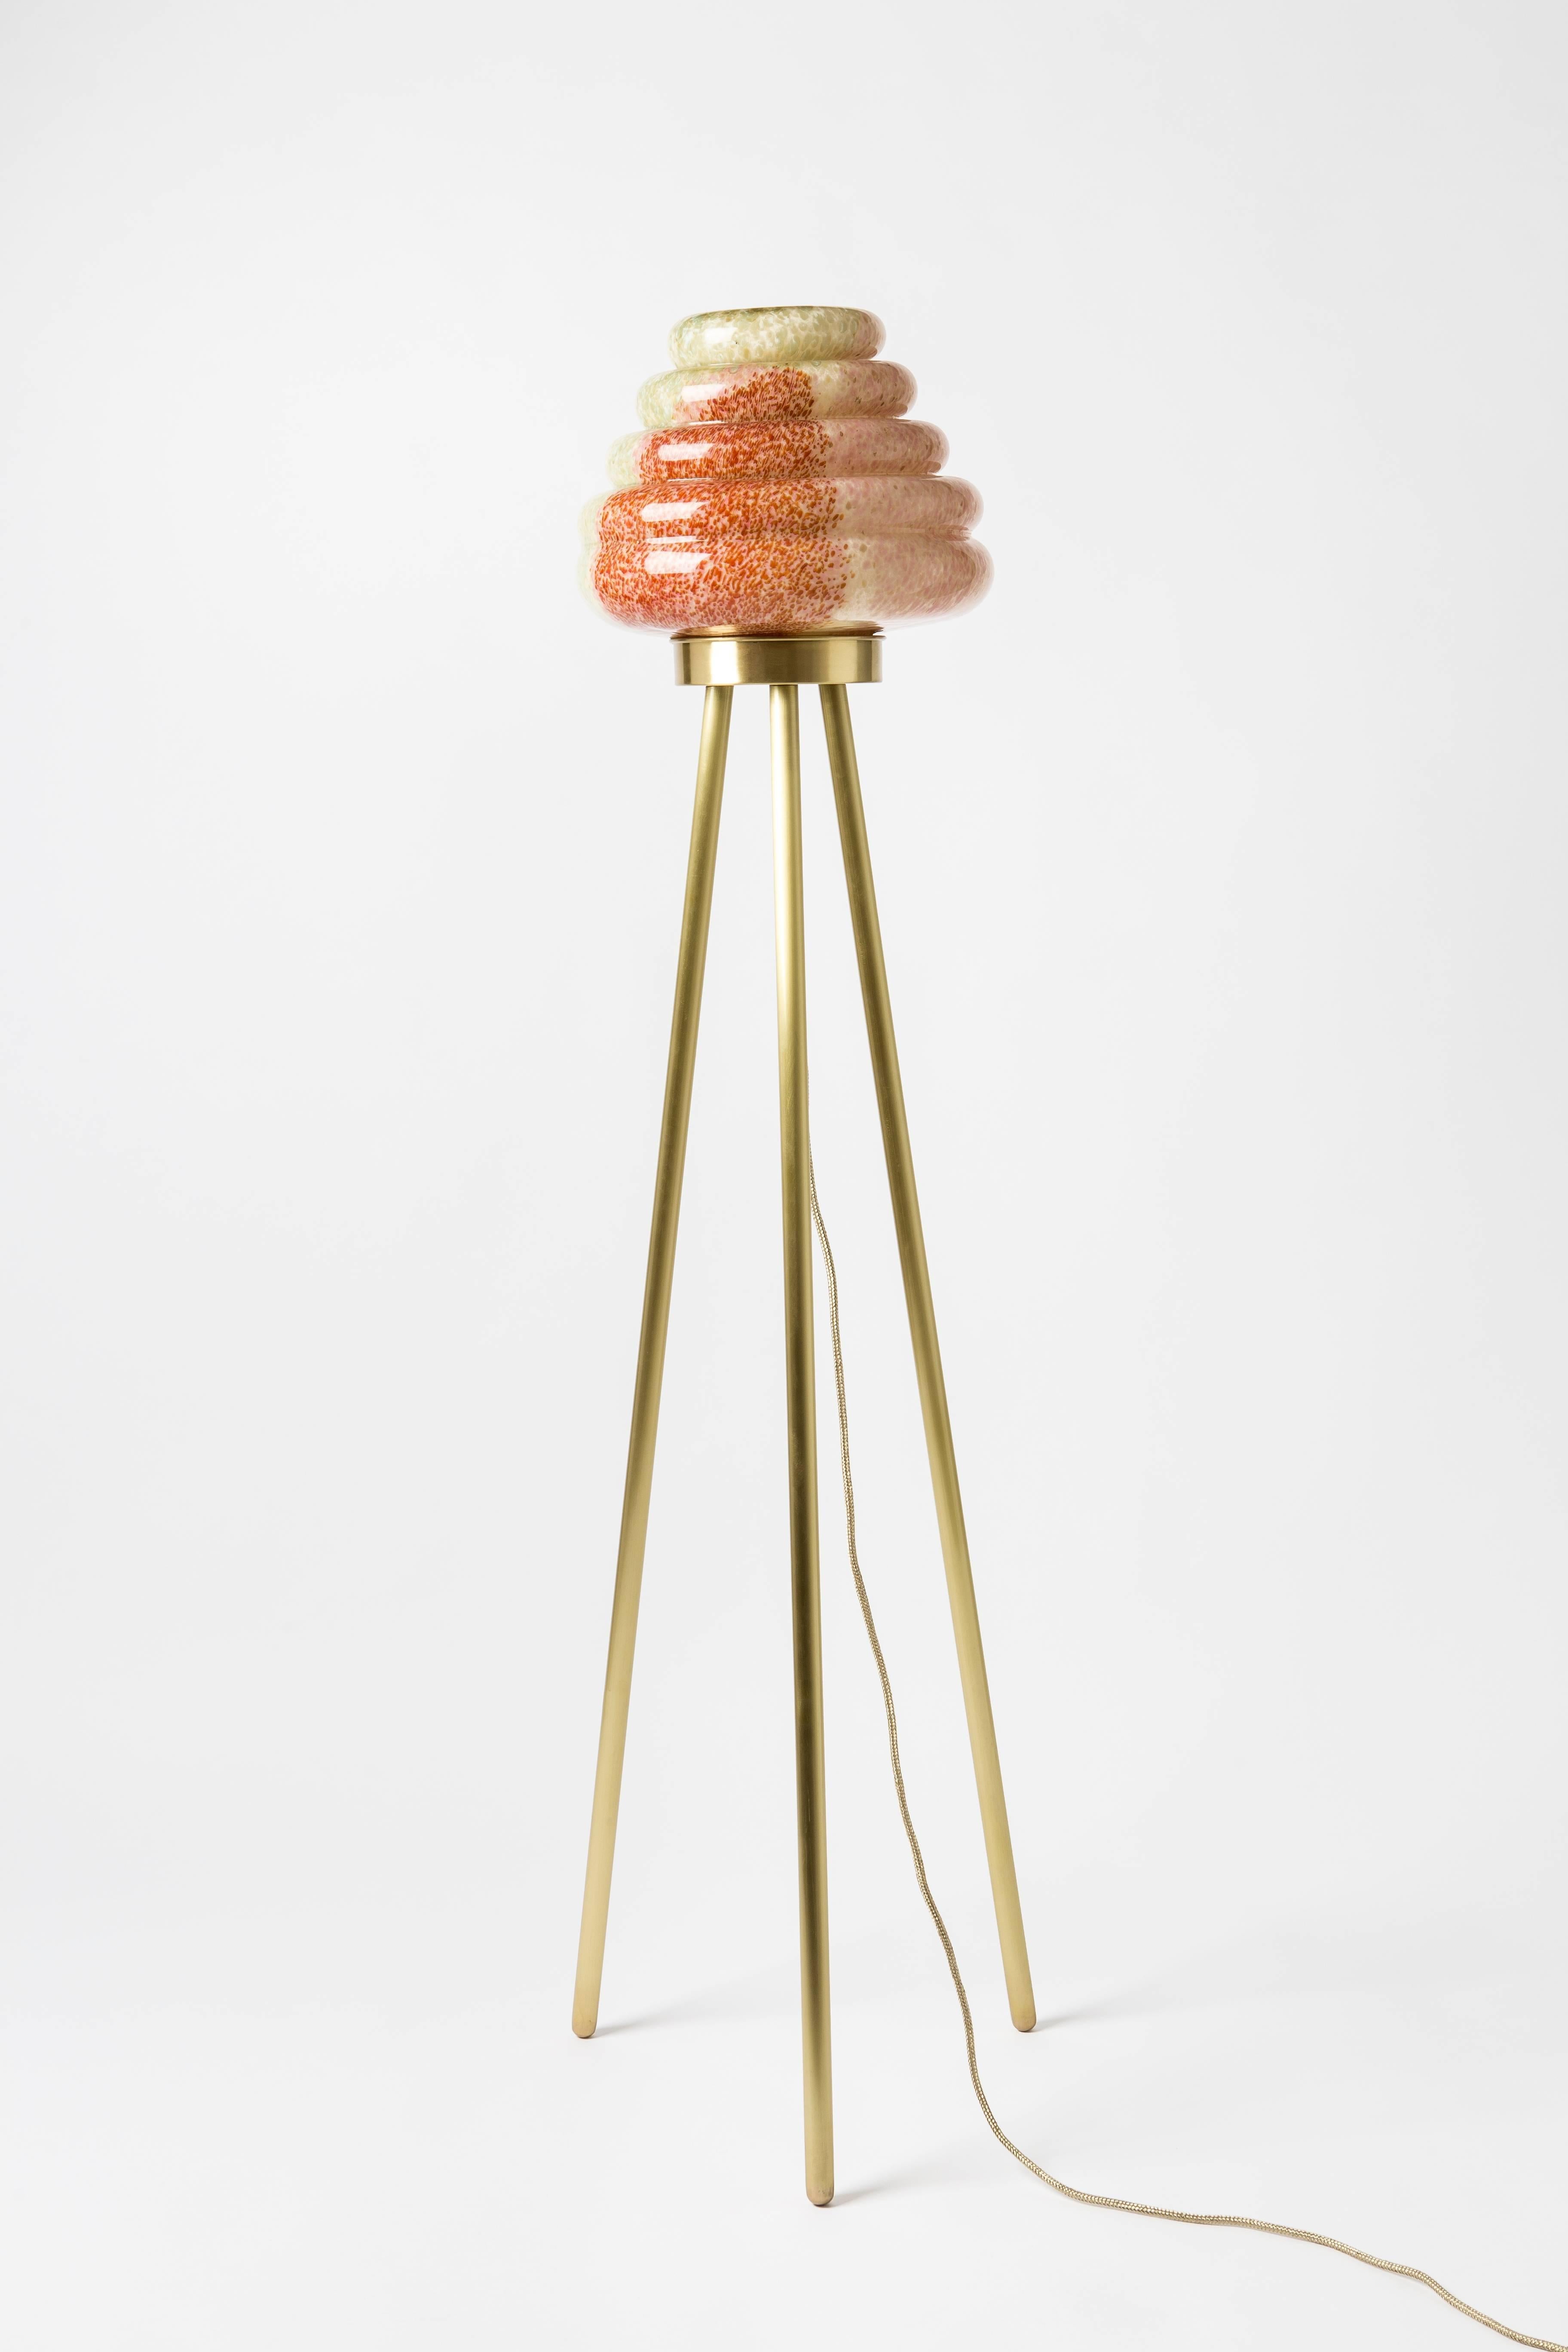 From esteemed Turkish designer, Merve Kahraman comes the elegant Colmena floor lamp.

This beehive inspired floor lamp comprises a dotted pattern handblown glass shade and matte brass legs 

A second version of Colmena has the mixed colored